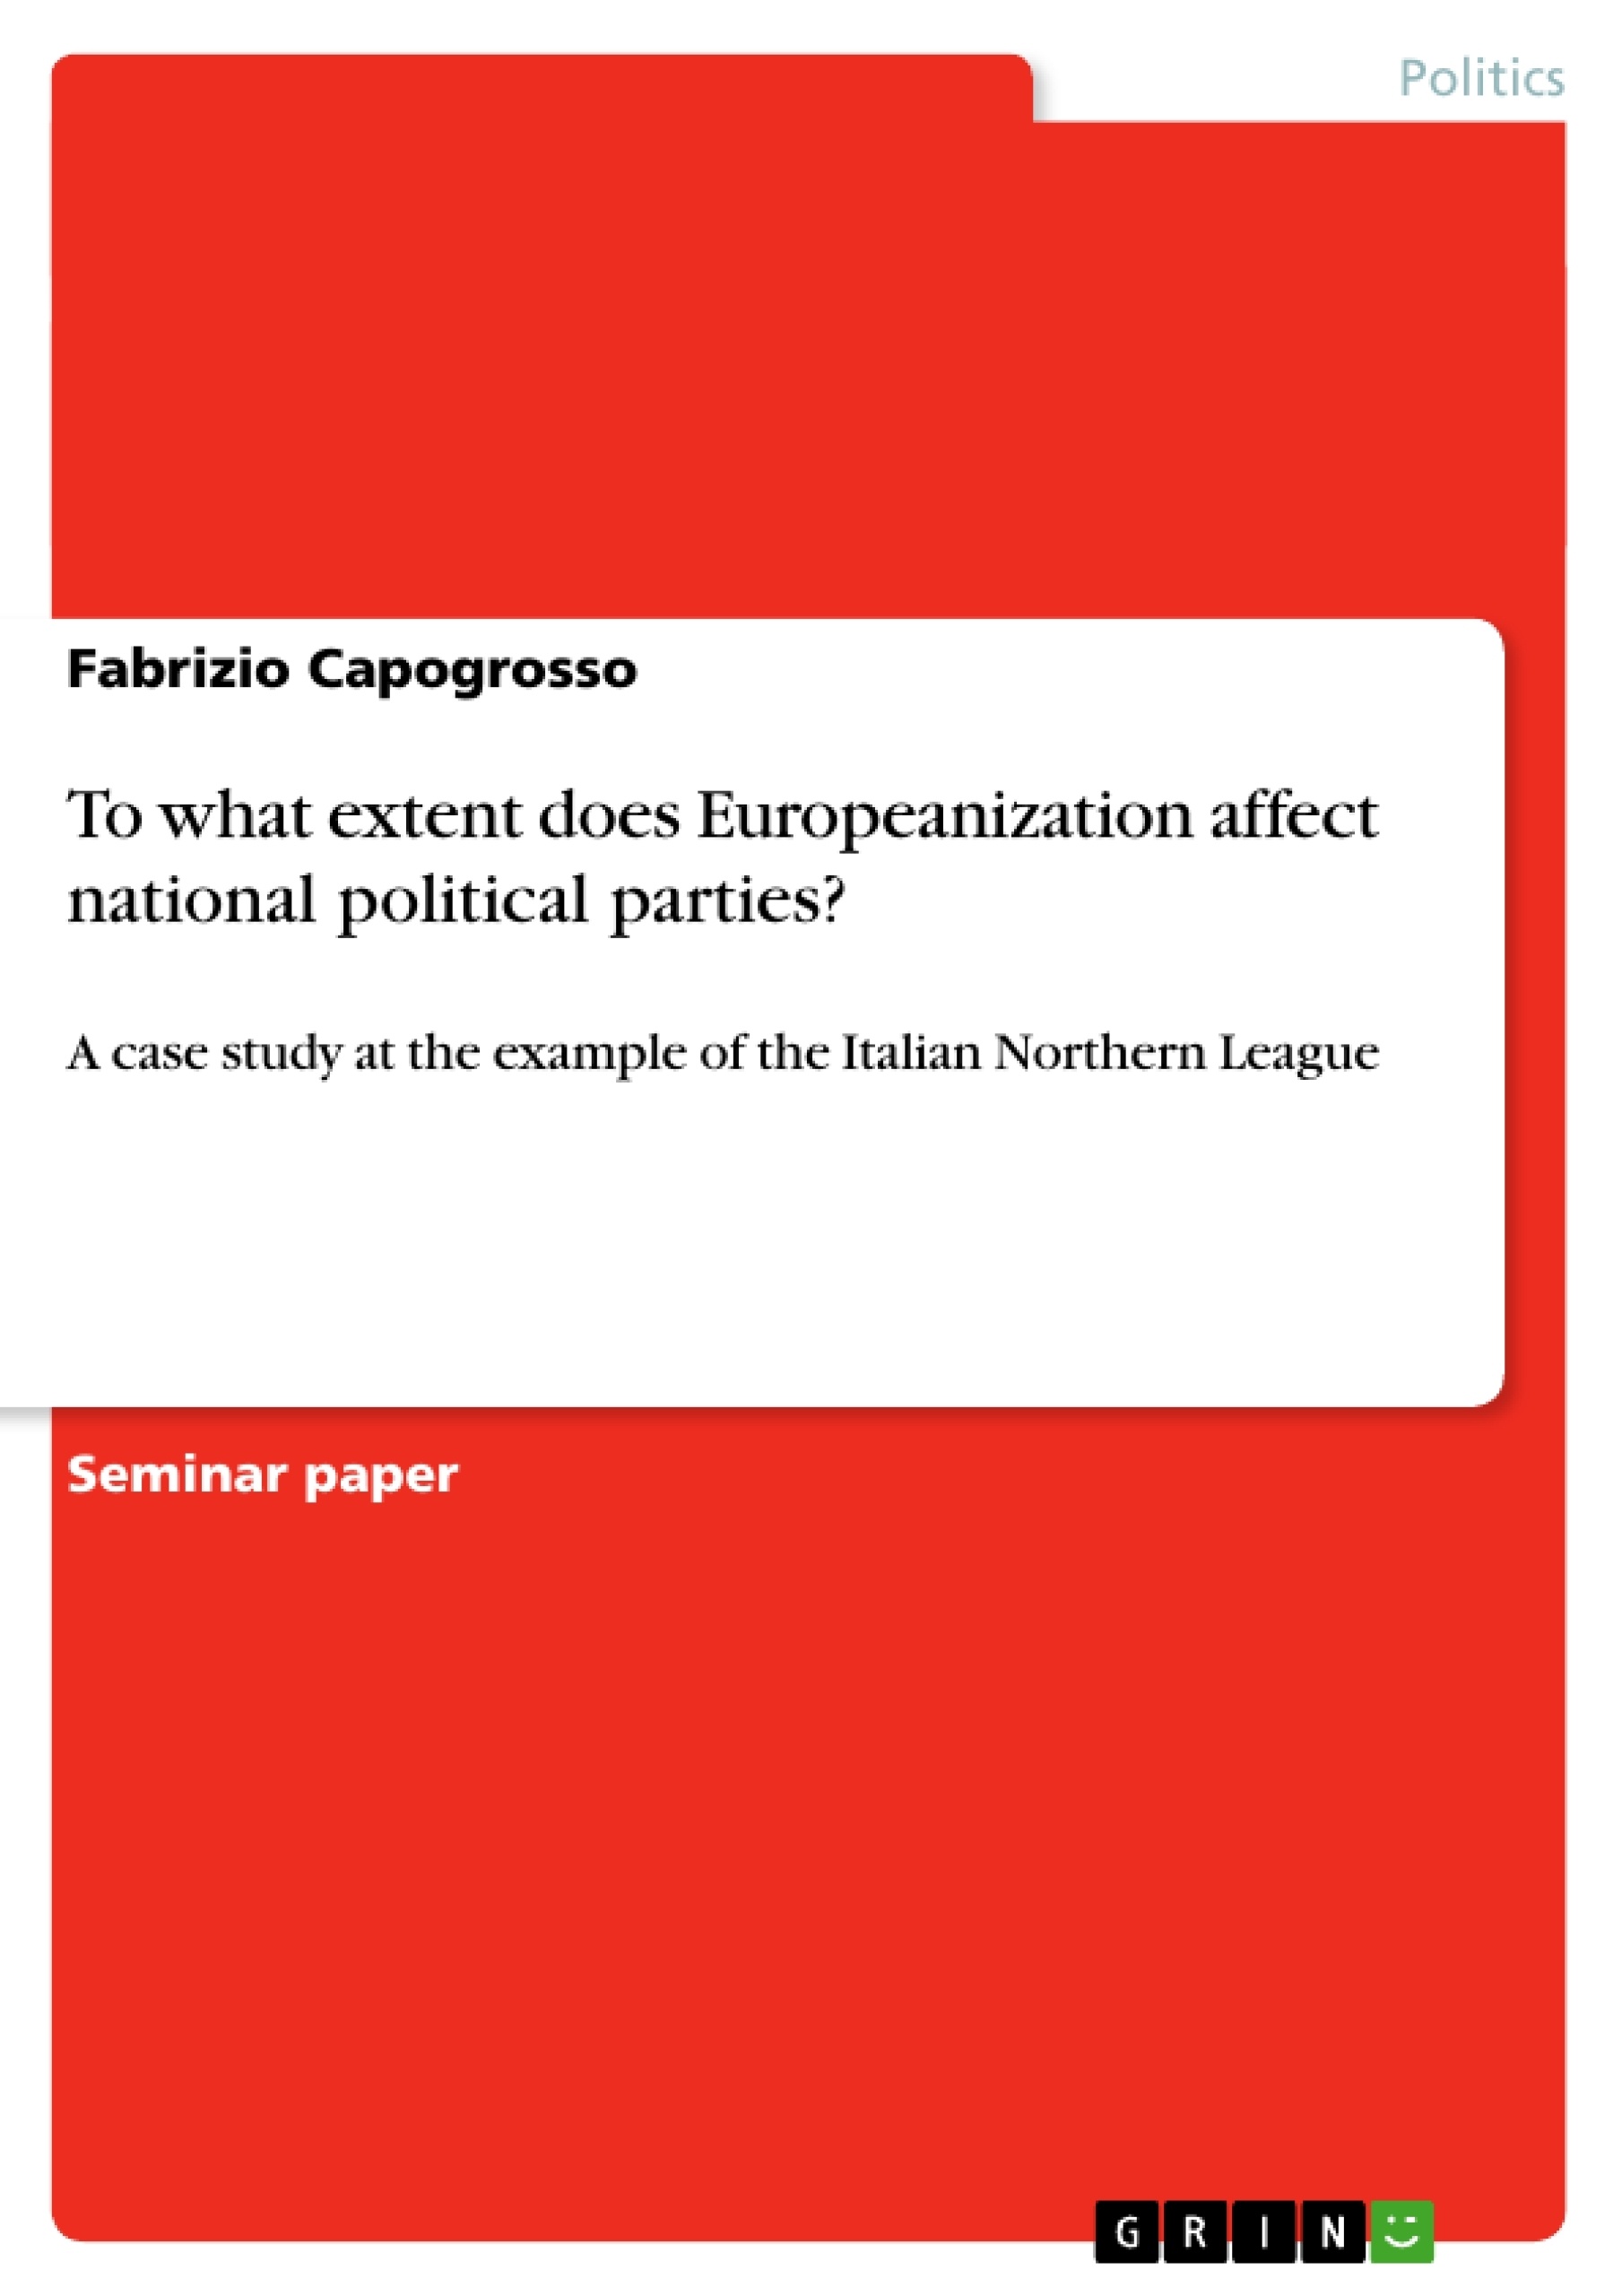 Title: To what extent does Europeanization affect national political parties?